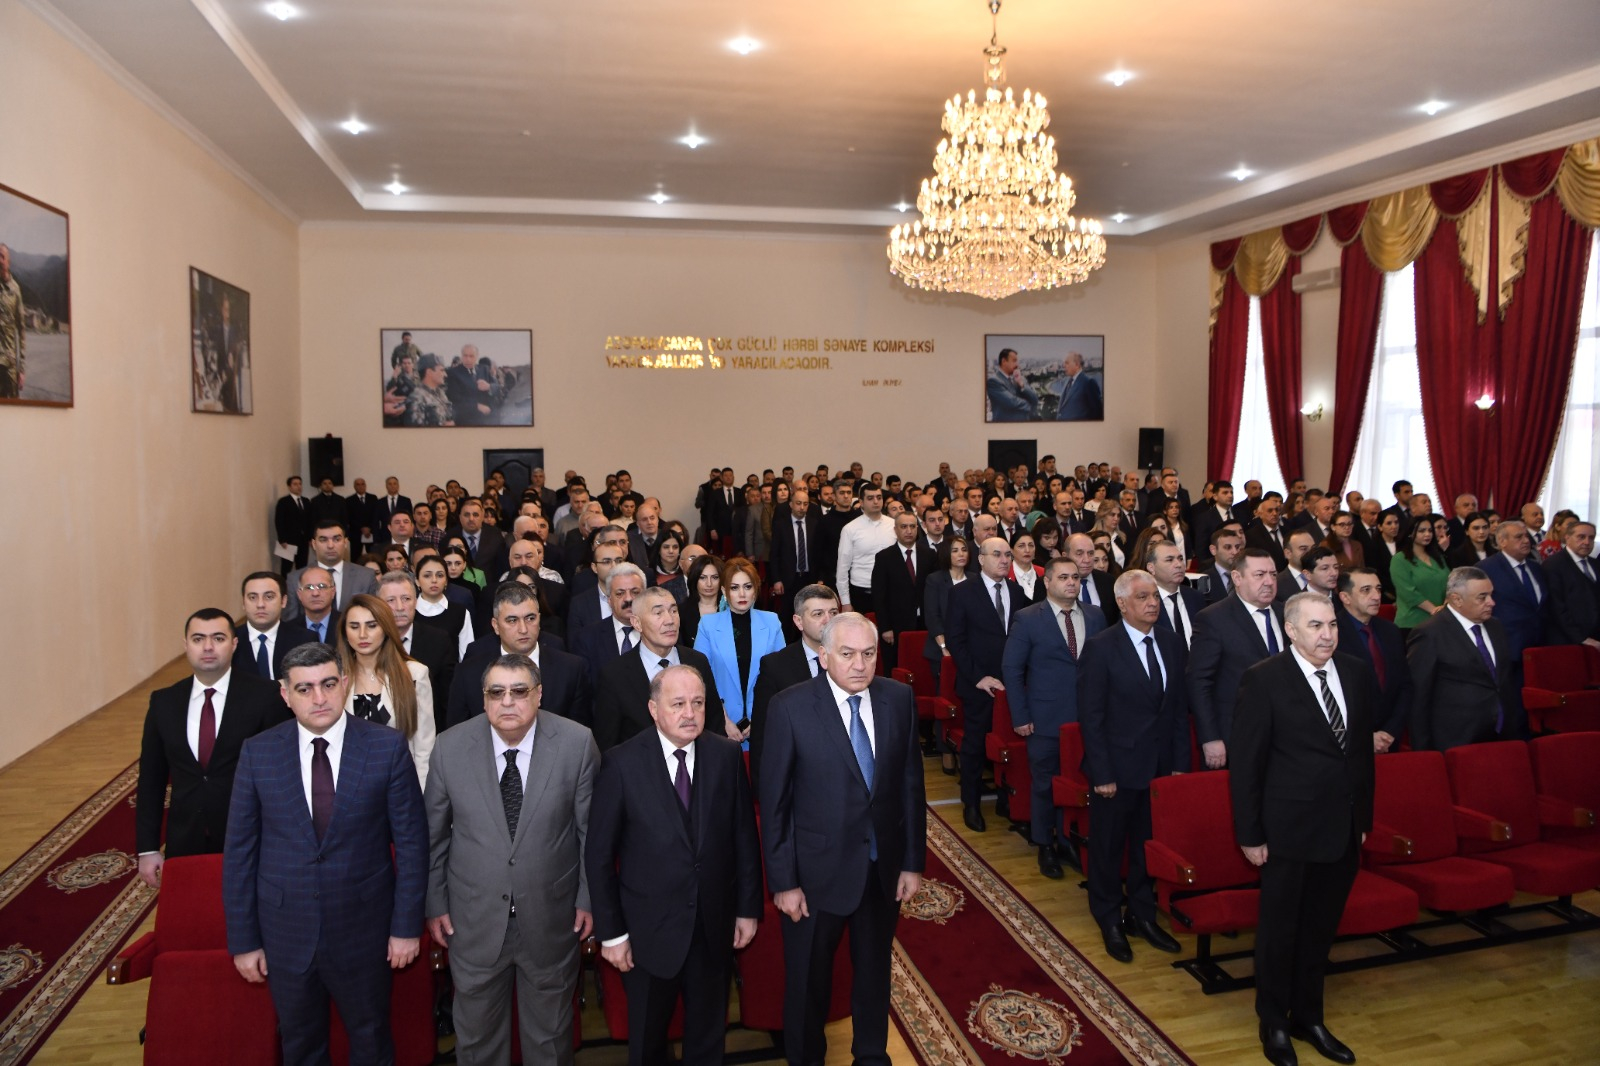 A forum on "Year of Heydar Aliyev" was held at the Ministry of Defense Industry